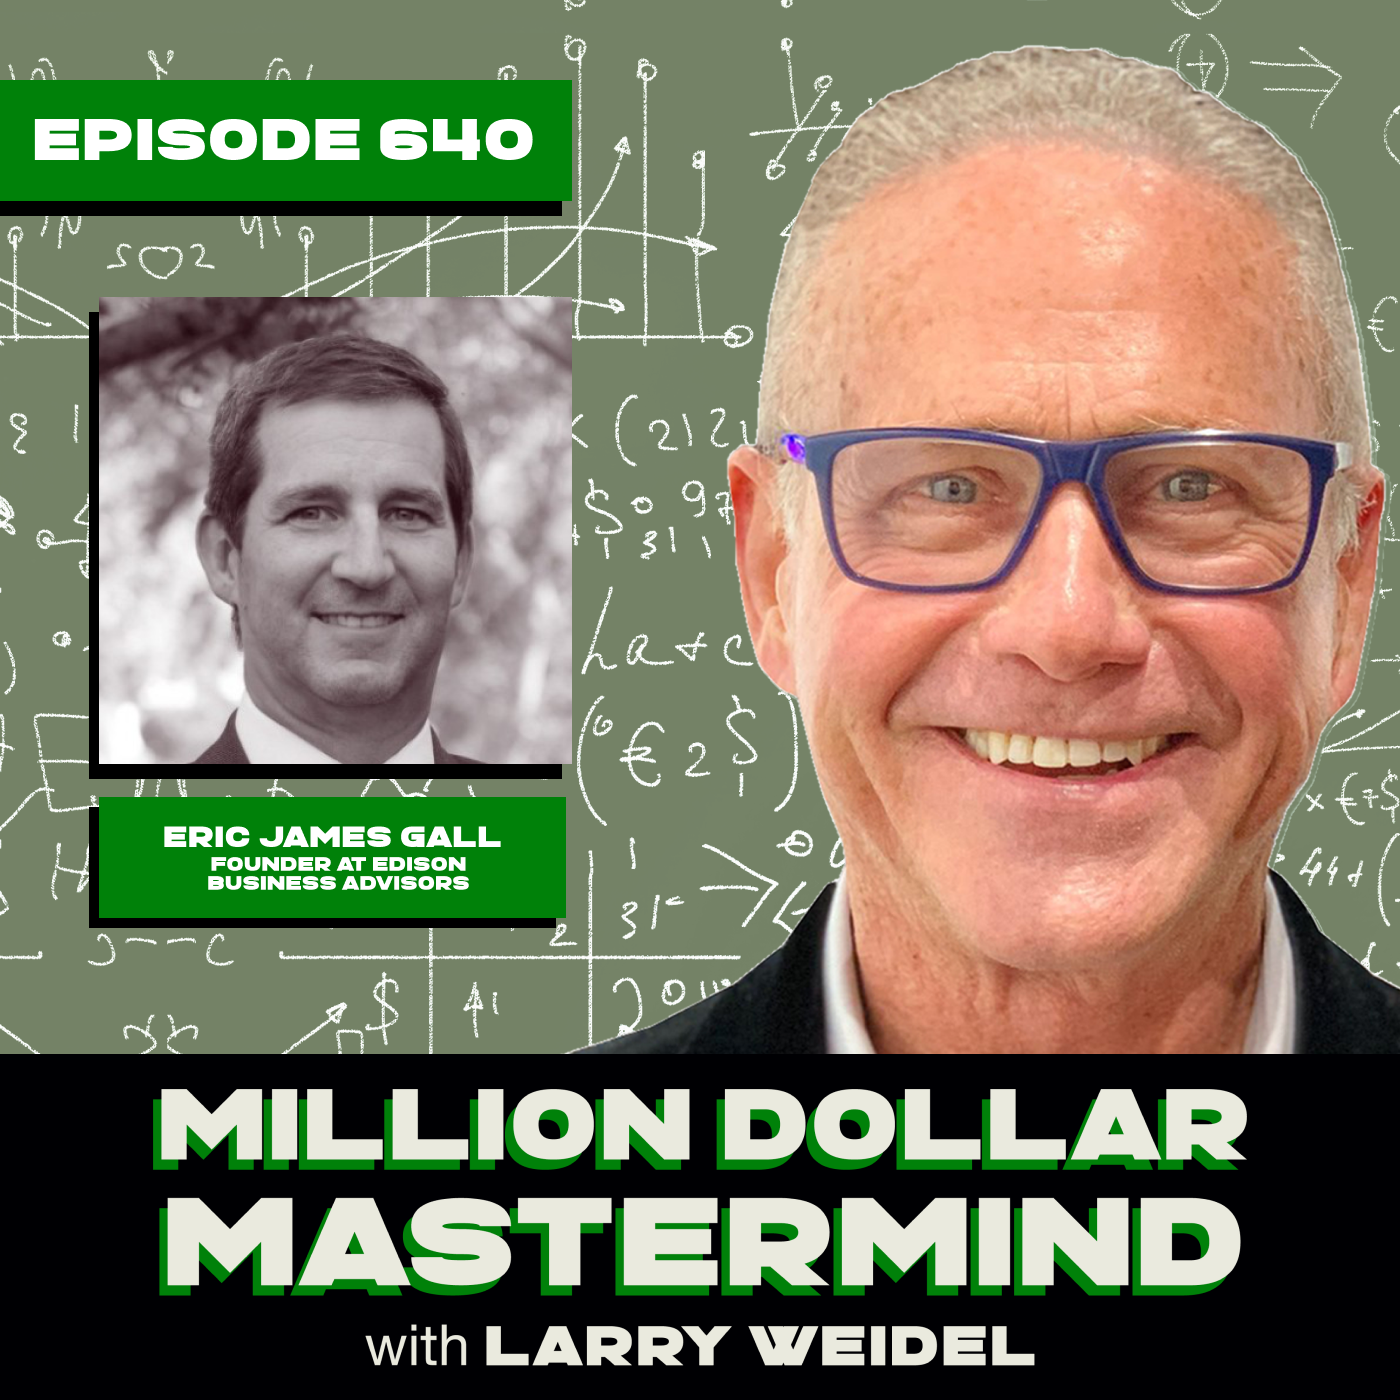 Episode #640 - Unlock Entrepreneur Potential with Eric J. Gall, Founder at Edison Business Advisors